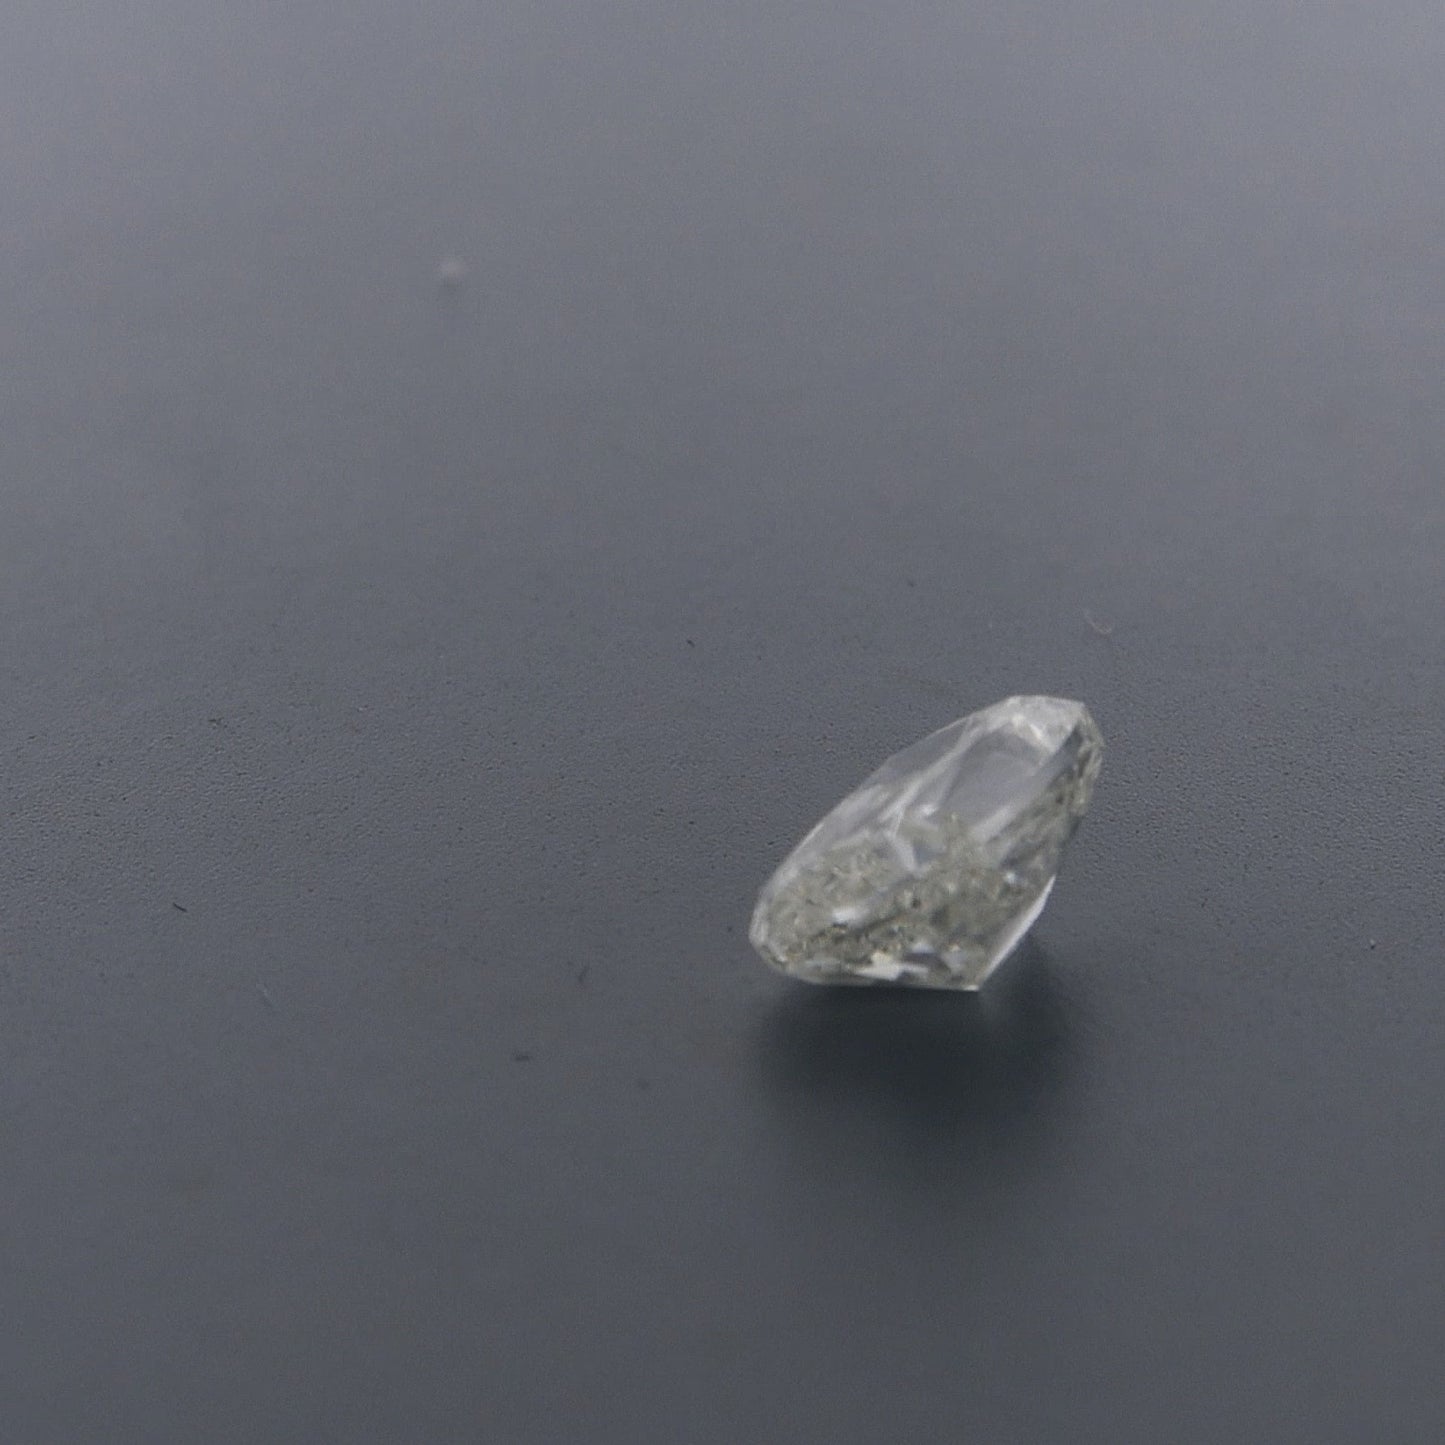 Elongated Cushion 1.56ct LVVS1 Diamond with GIA Certification